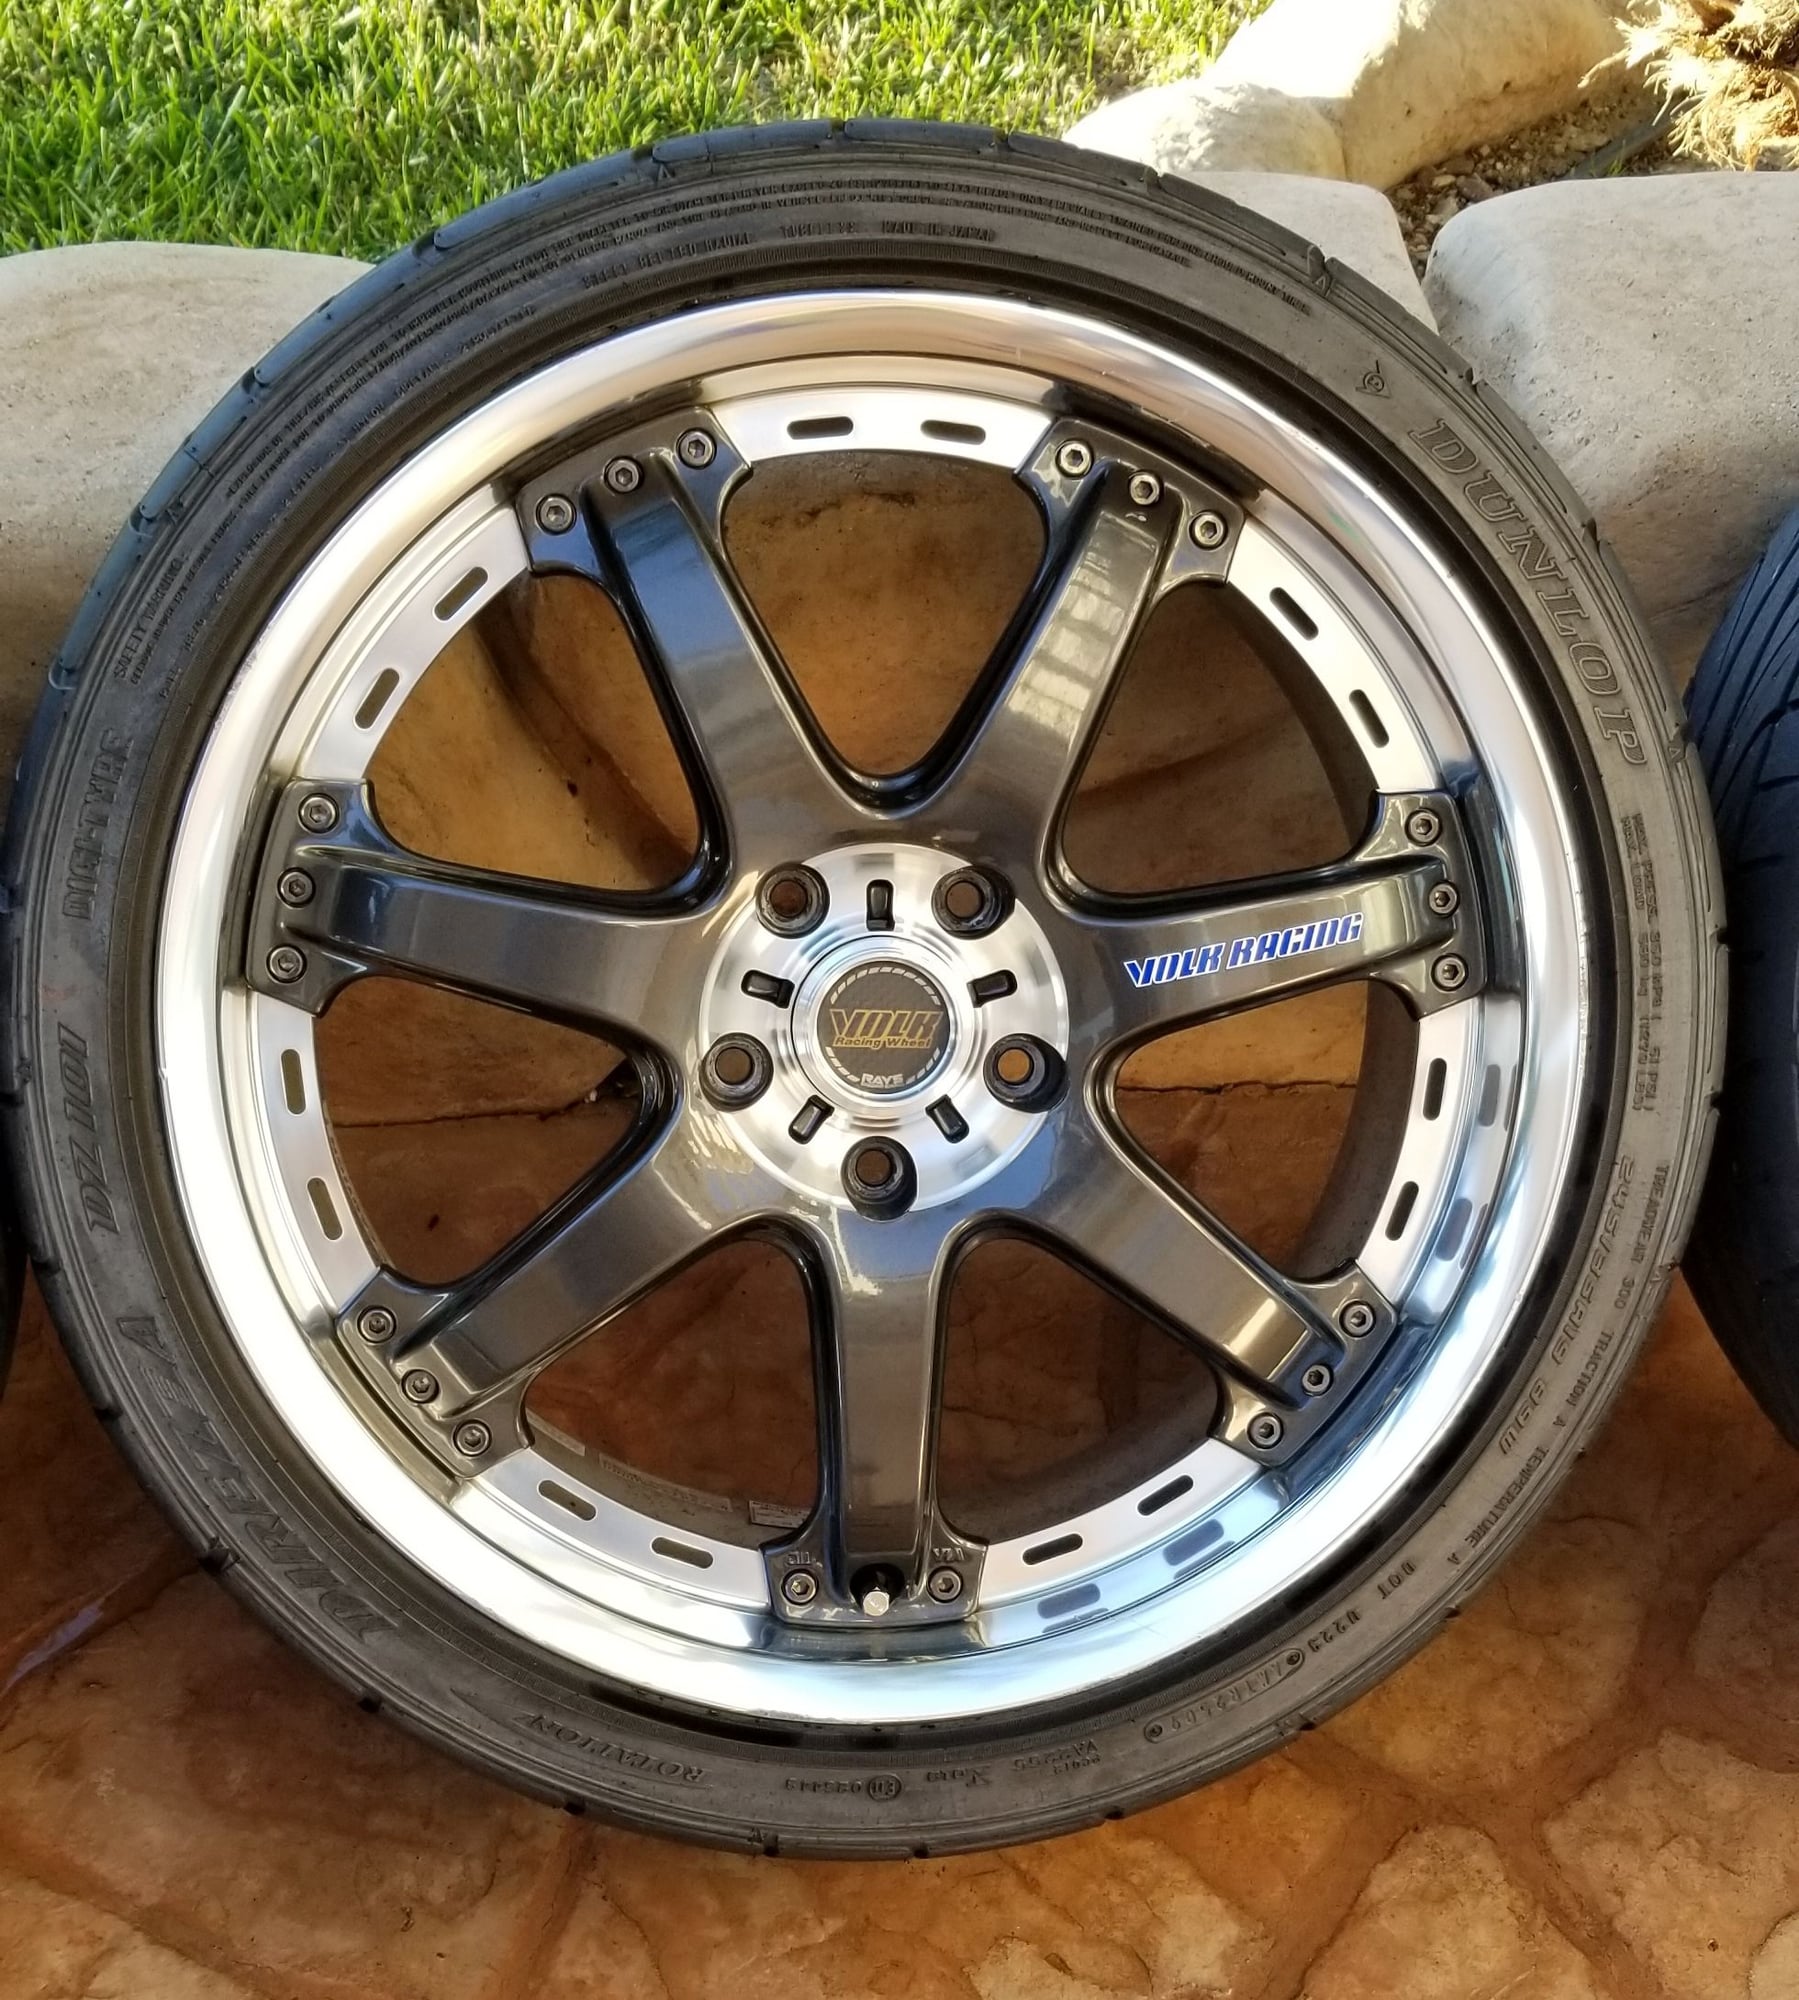 Wheels and Tires/Axles - Volk Racing GT-7 - Used - 2001 to 2005 Lexus IS300 - 1993 to 2006 Lexus GS300 - 2006 to 2013 Lexus IS250 - 1991 to 2018 Lexus ES300 - San Diego, CA 92126, United States